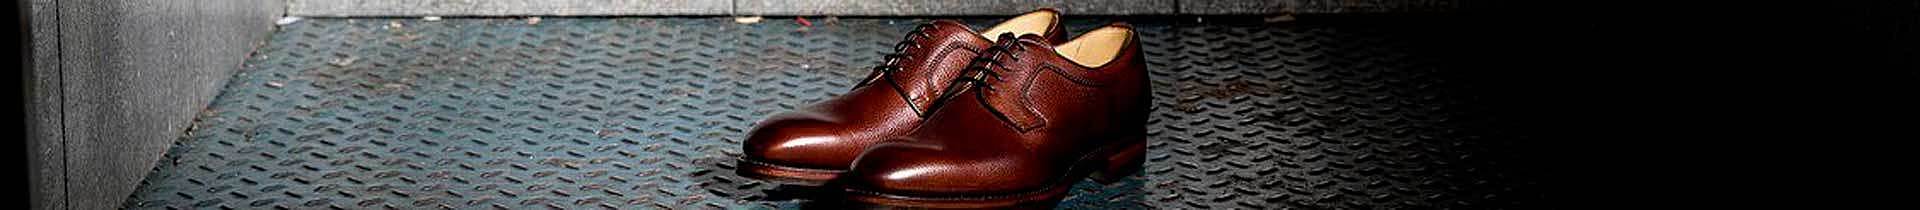 Chaussures Barker pour hommes